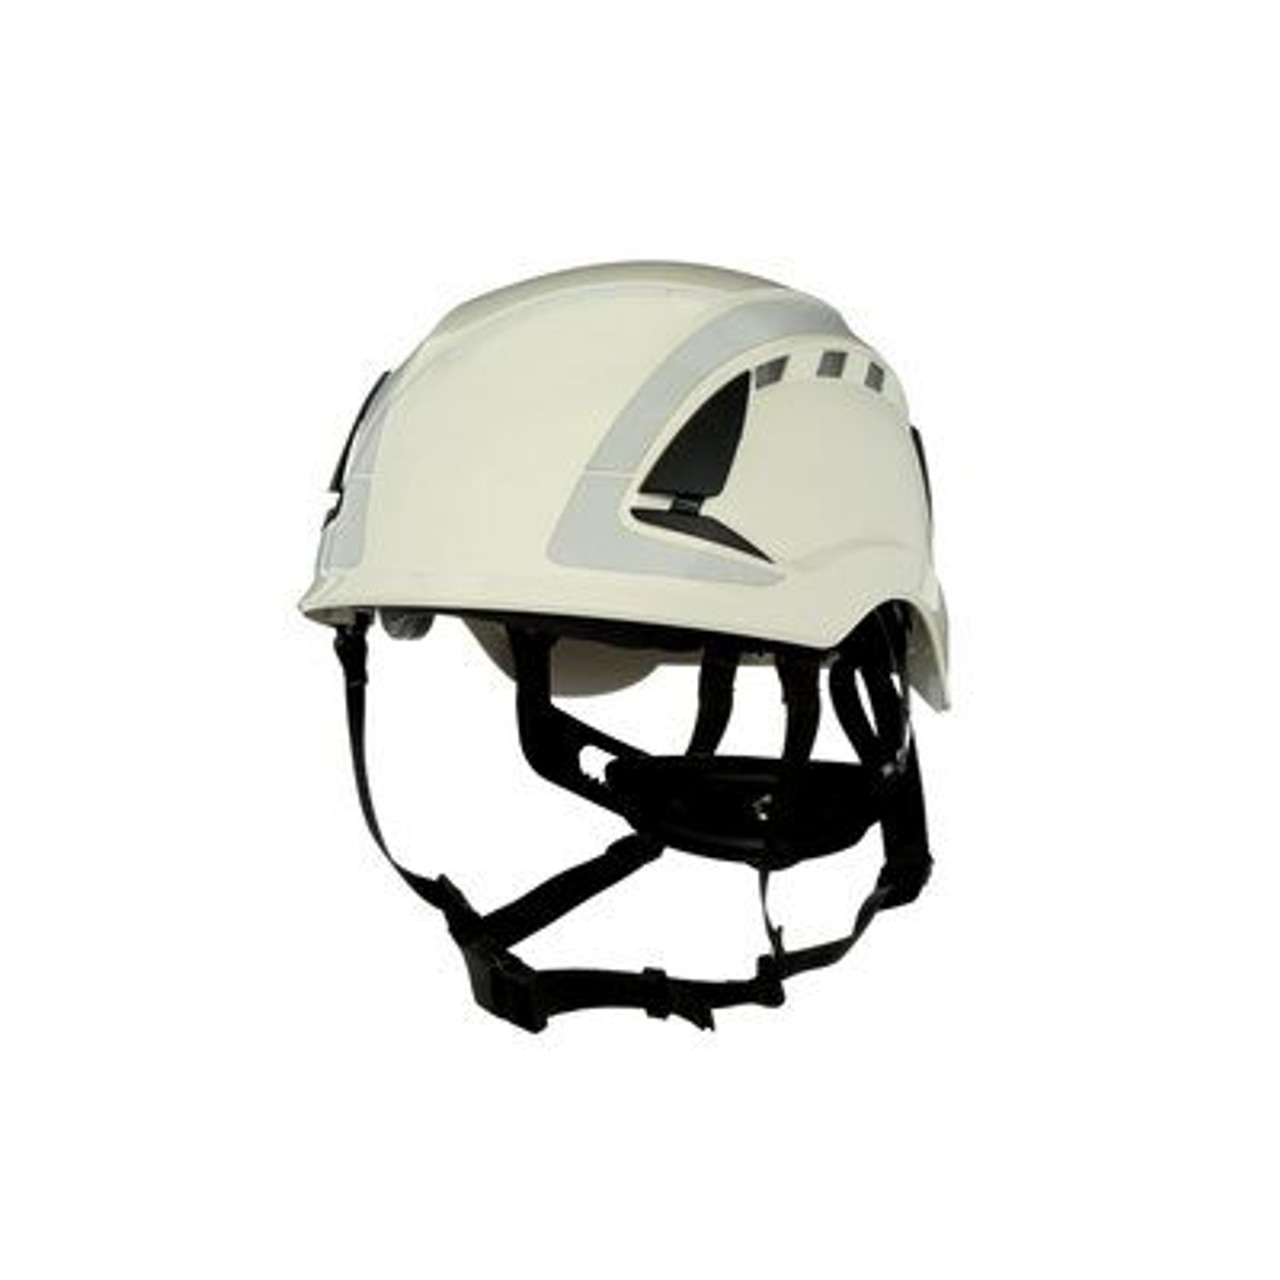 3M X5000 SecureFit Safety Helmet ANSI Vented and Reflective 10 Ea/Case  Industrial Safety Products